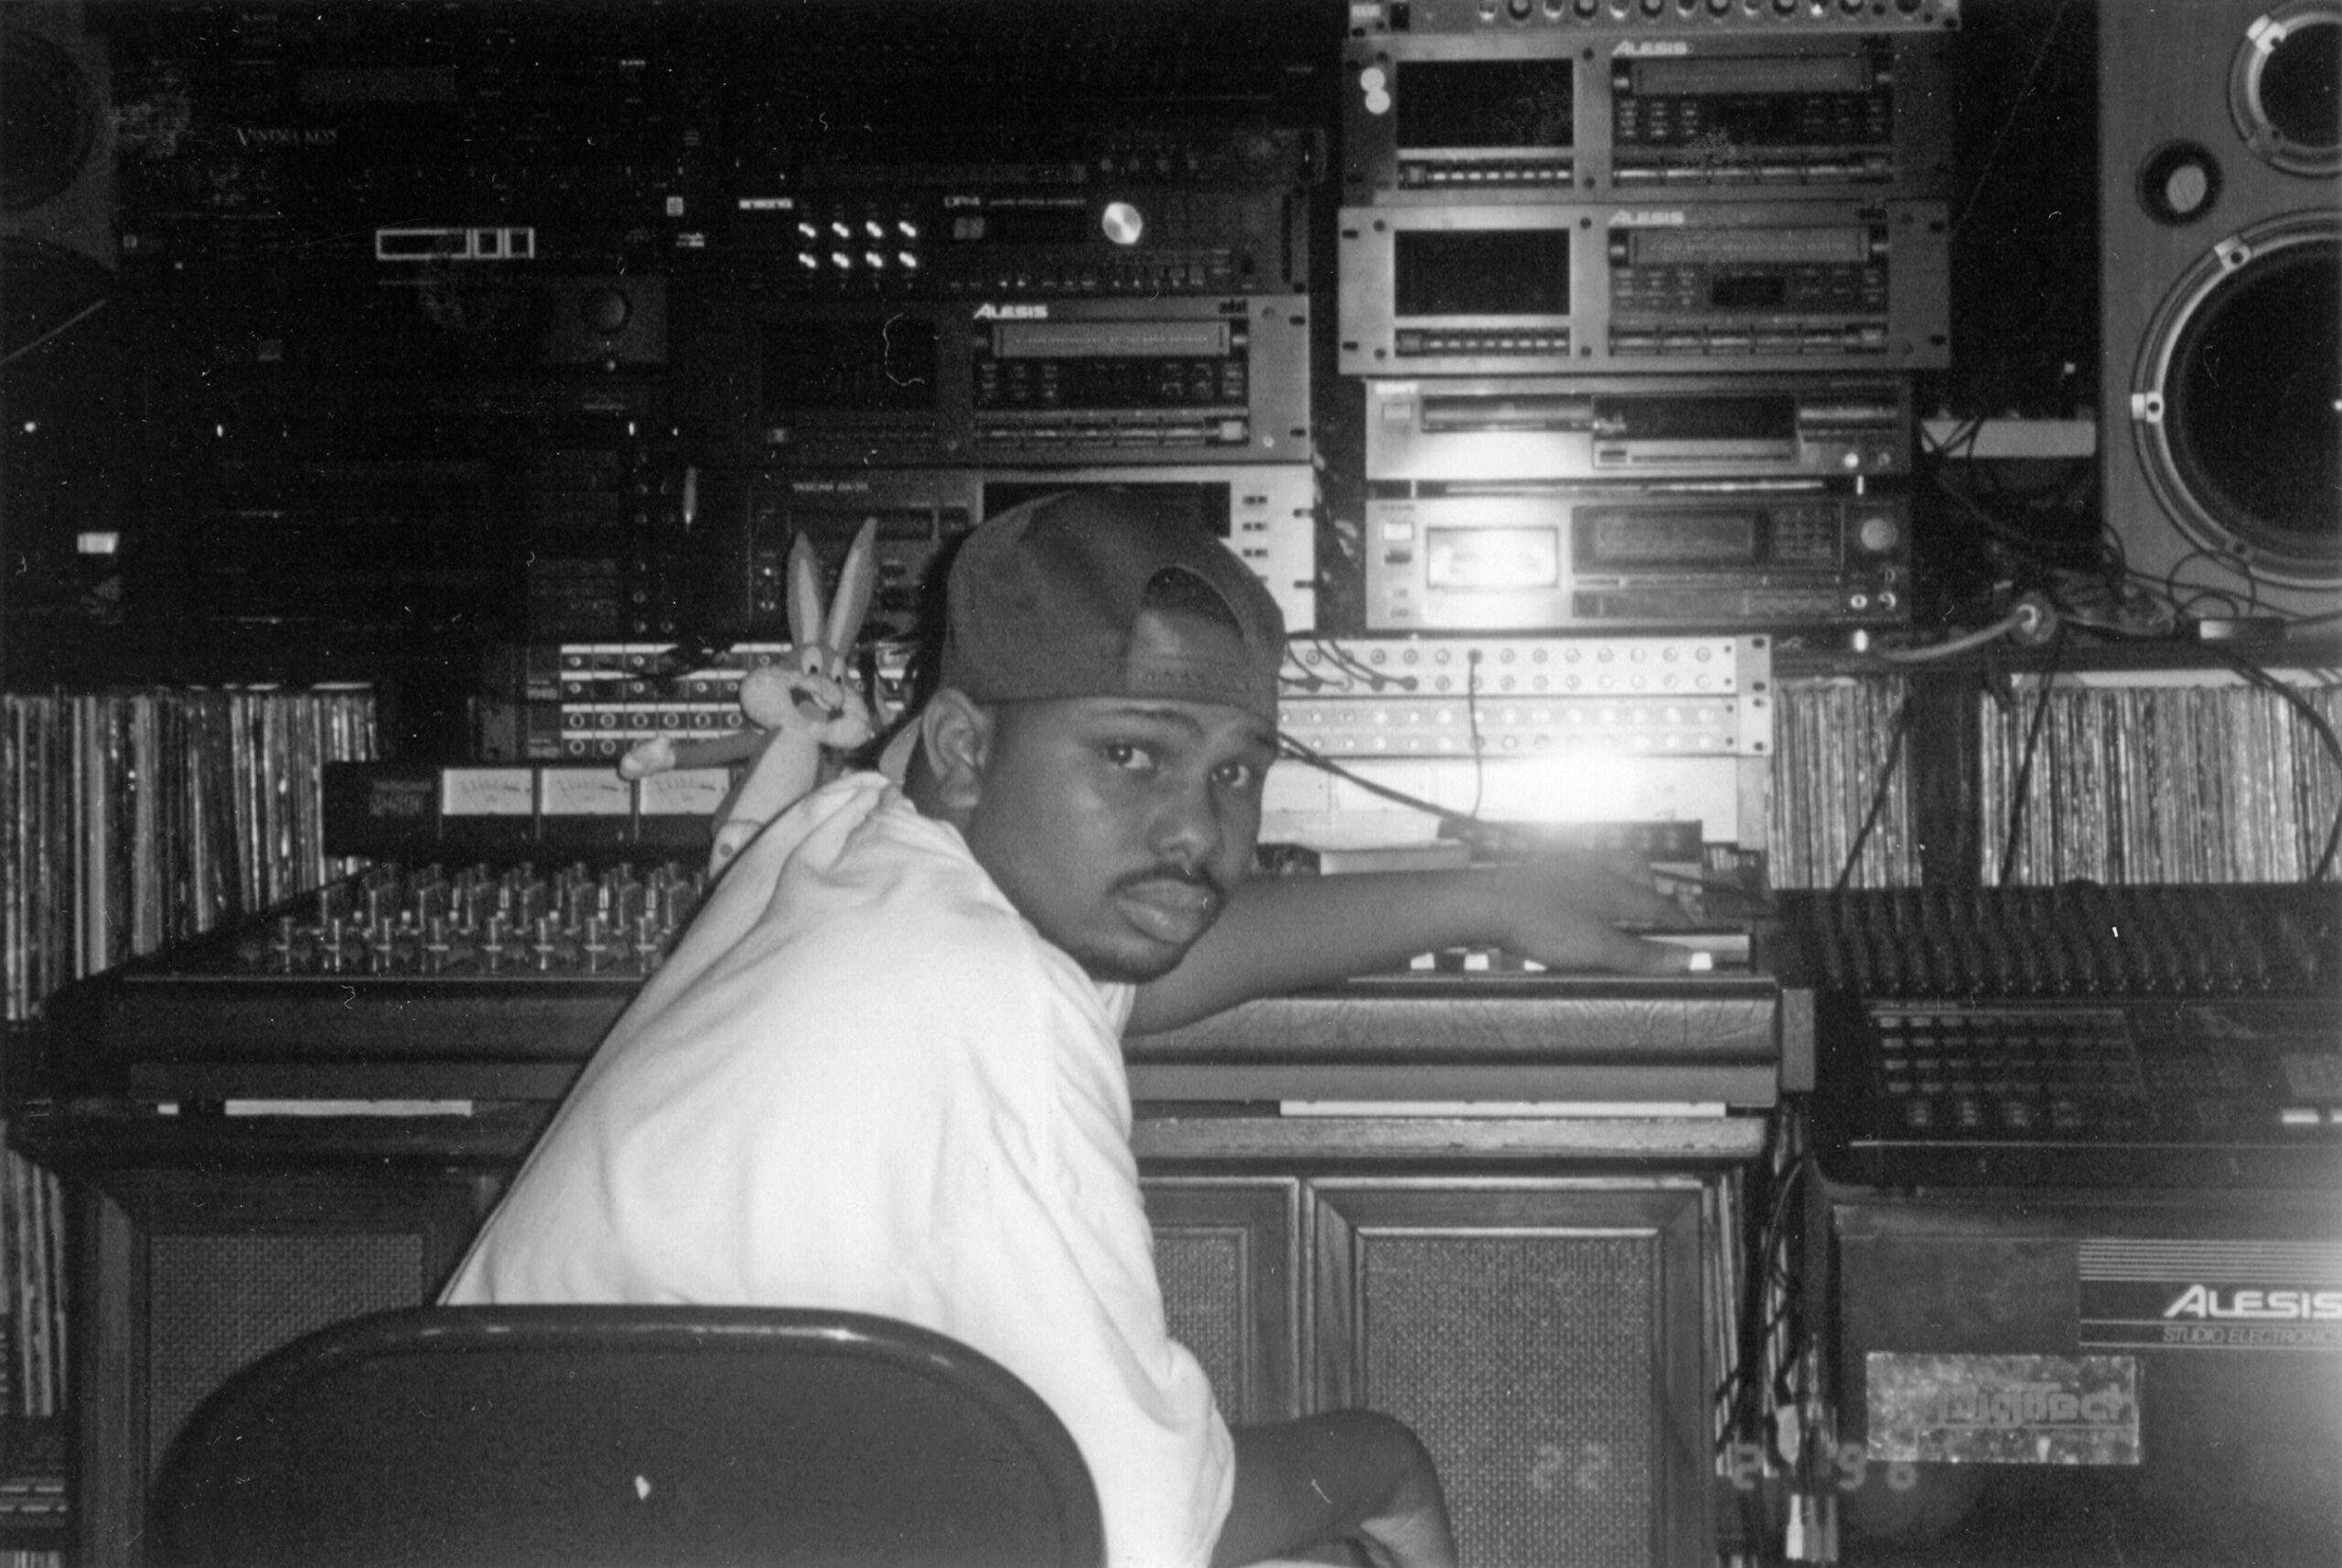 DJ Screw seated in studio, surrounded by recording equipment with a Bugs Bunny doll visible.